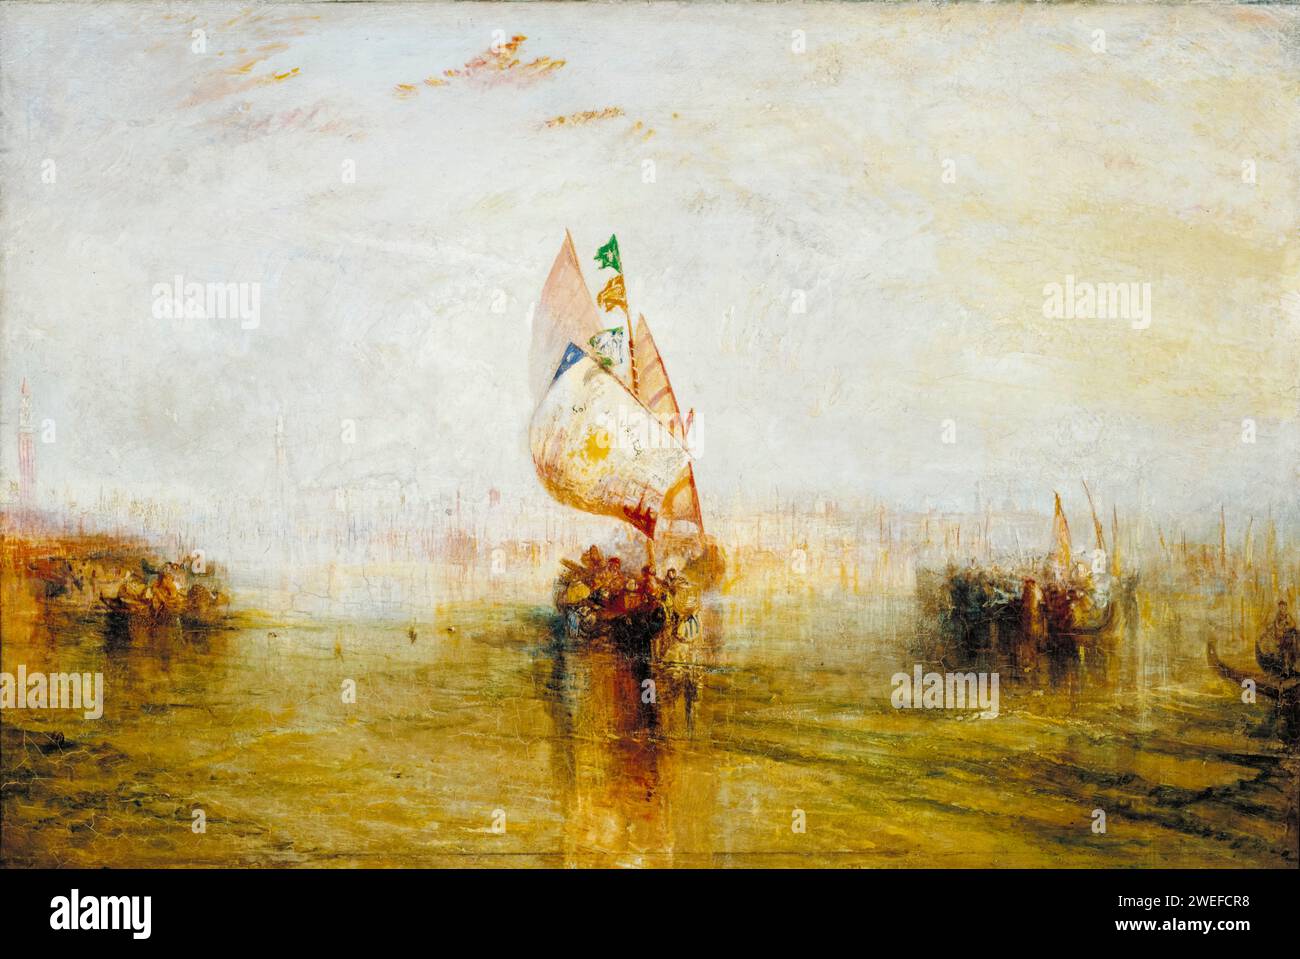 JMW Turner, The Sun of Venice Going to Sea, painting in oil on canvas, 1843 Stock Photo